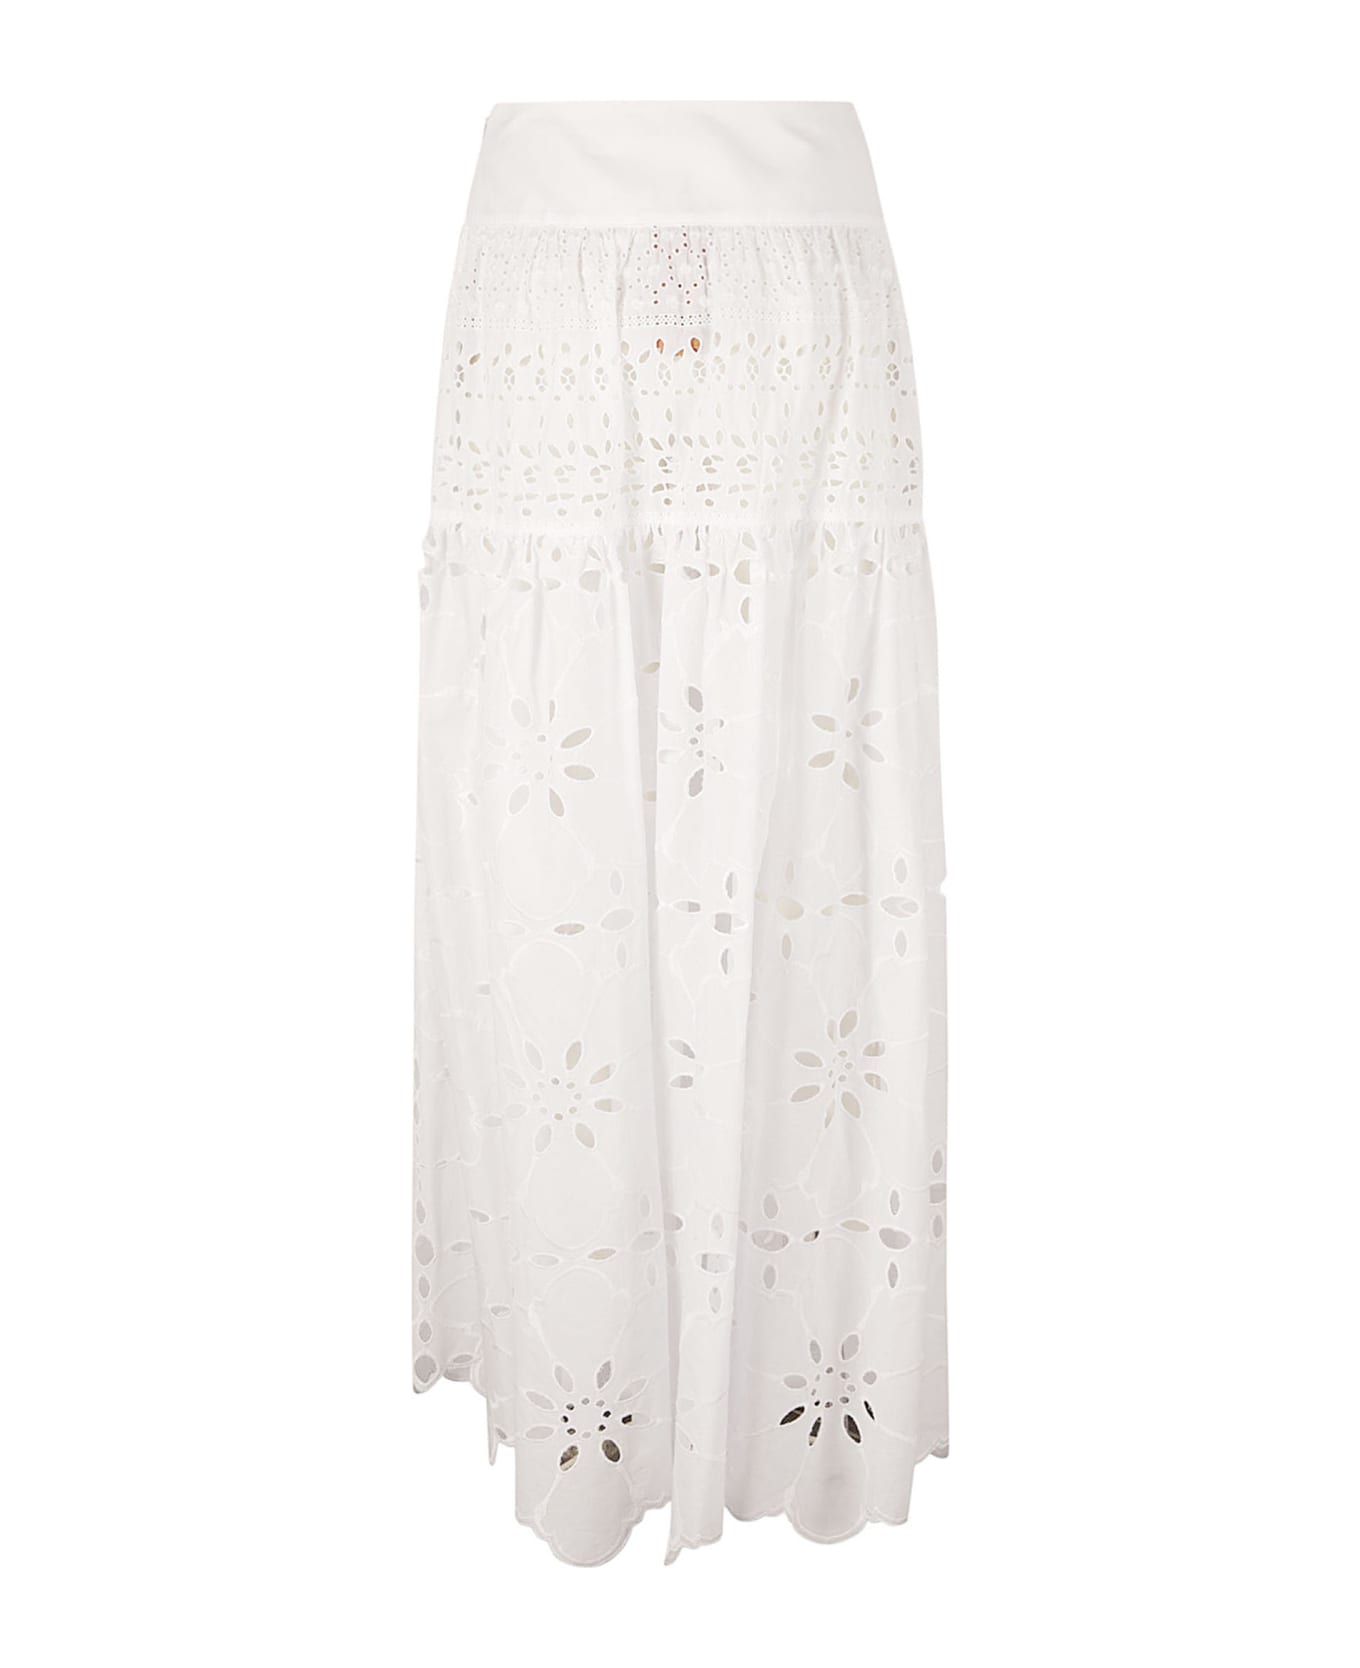 Ermanno Scervino High-waist Floral Perforated Skirt - White スカート